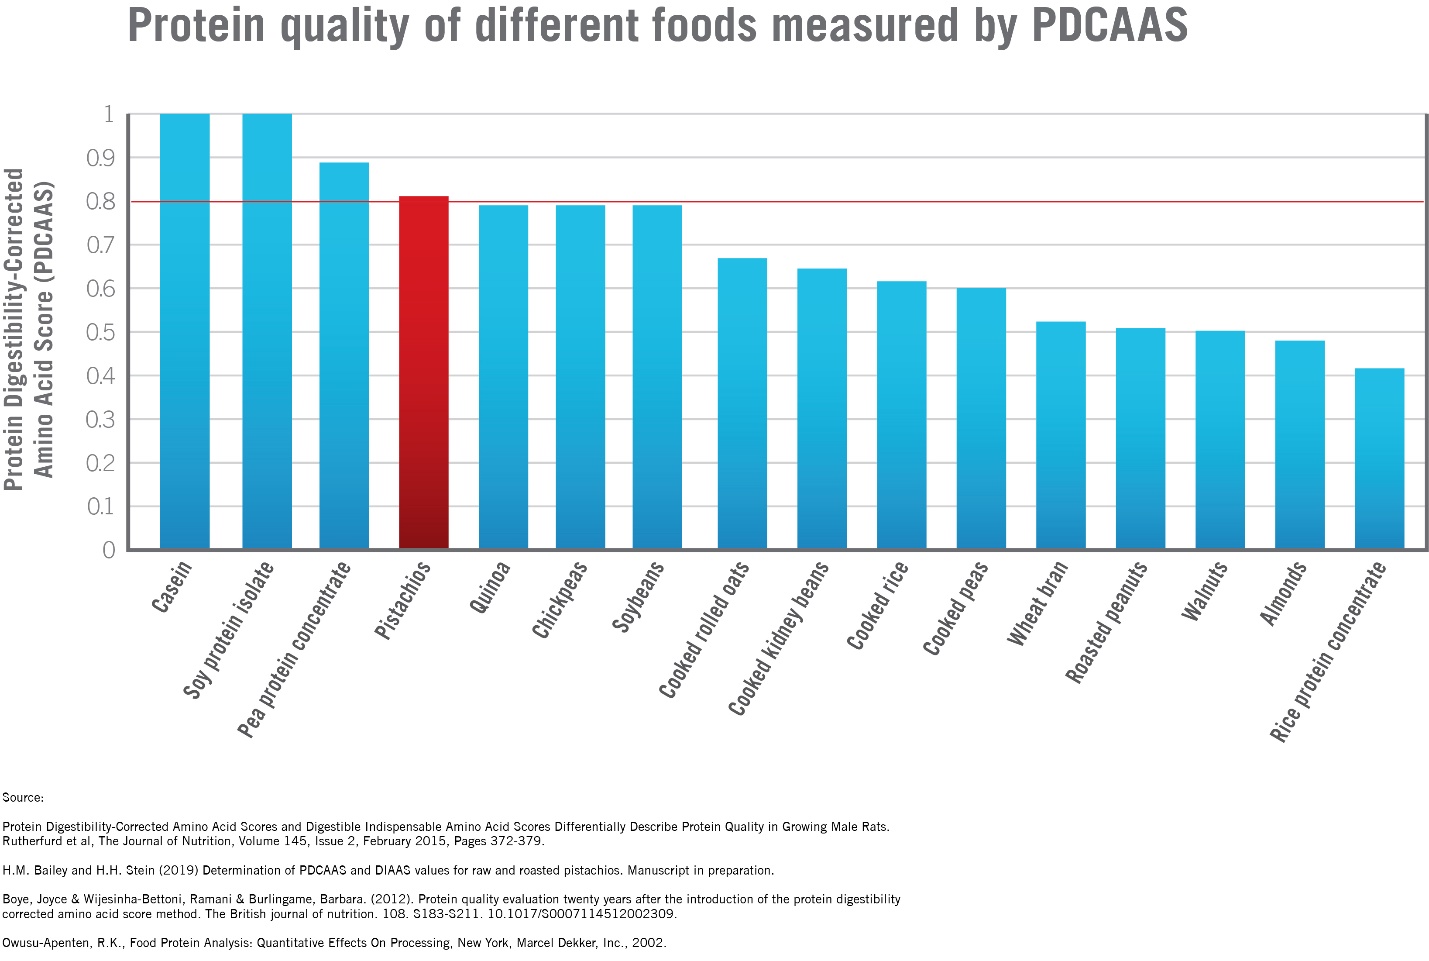 Protein quality of different foods measured by PDCAAS